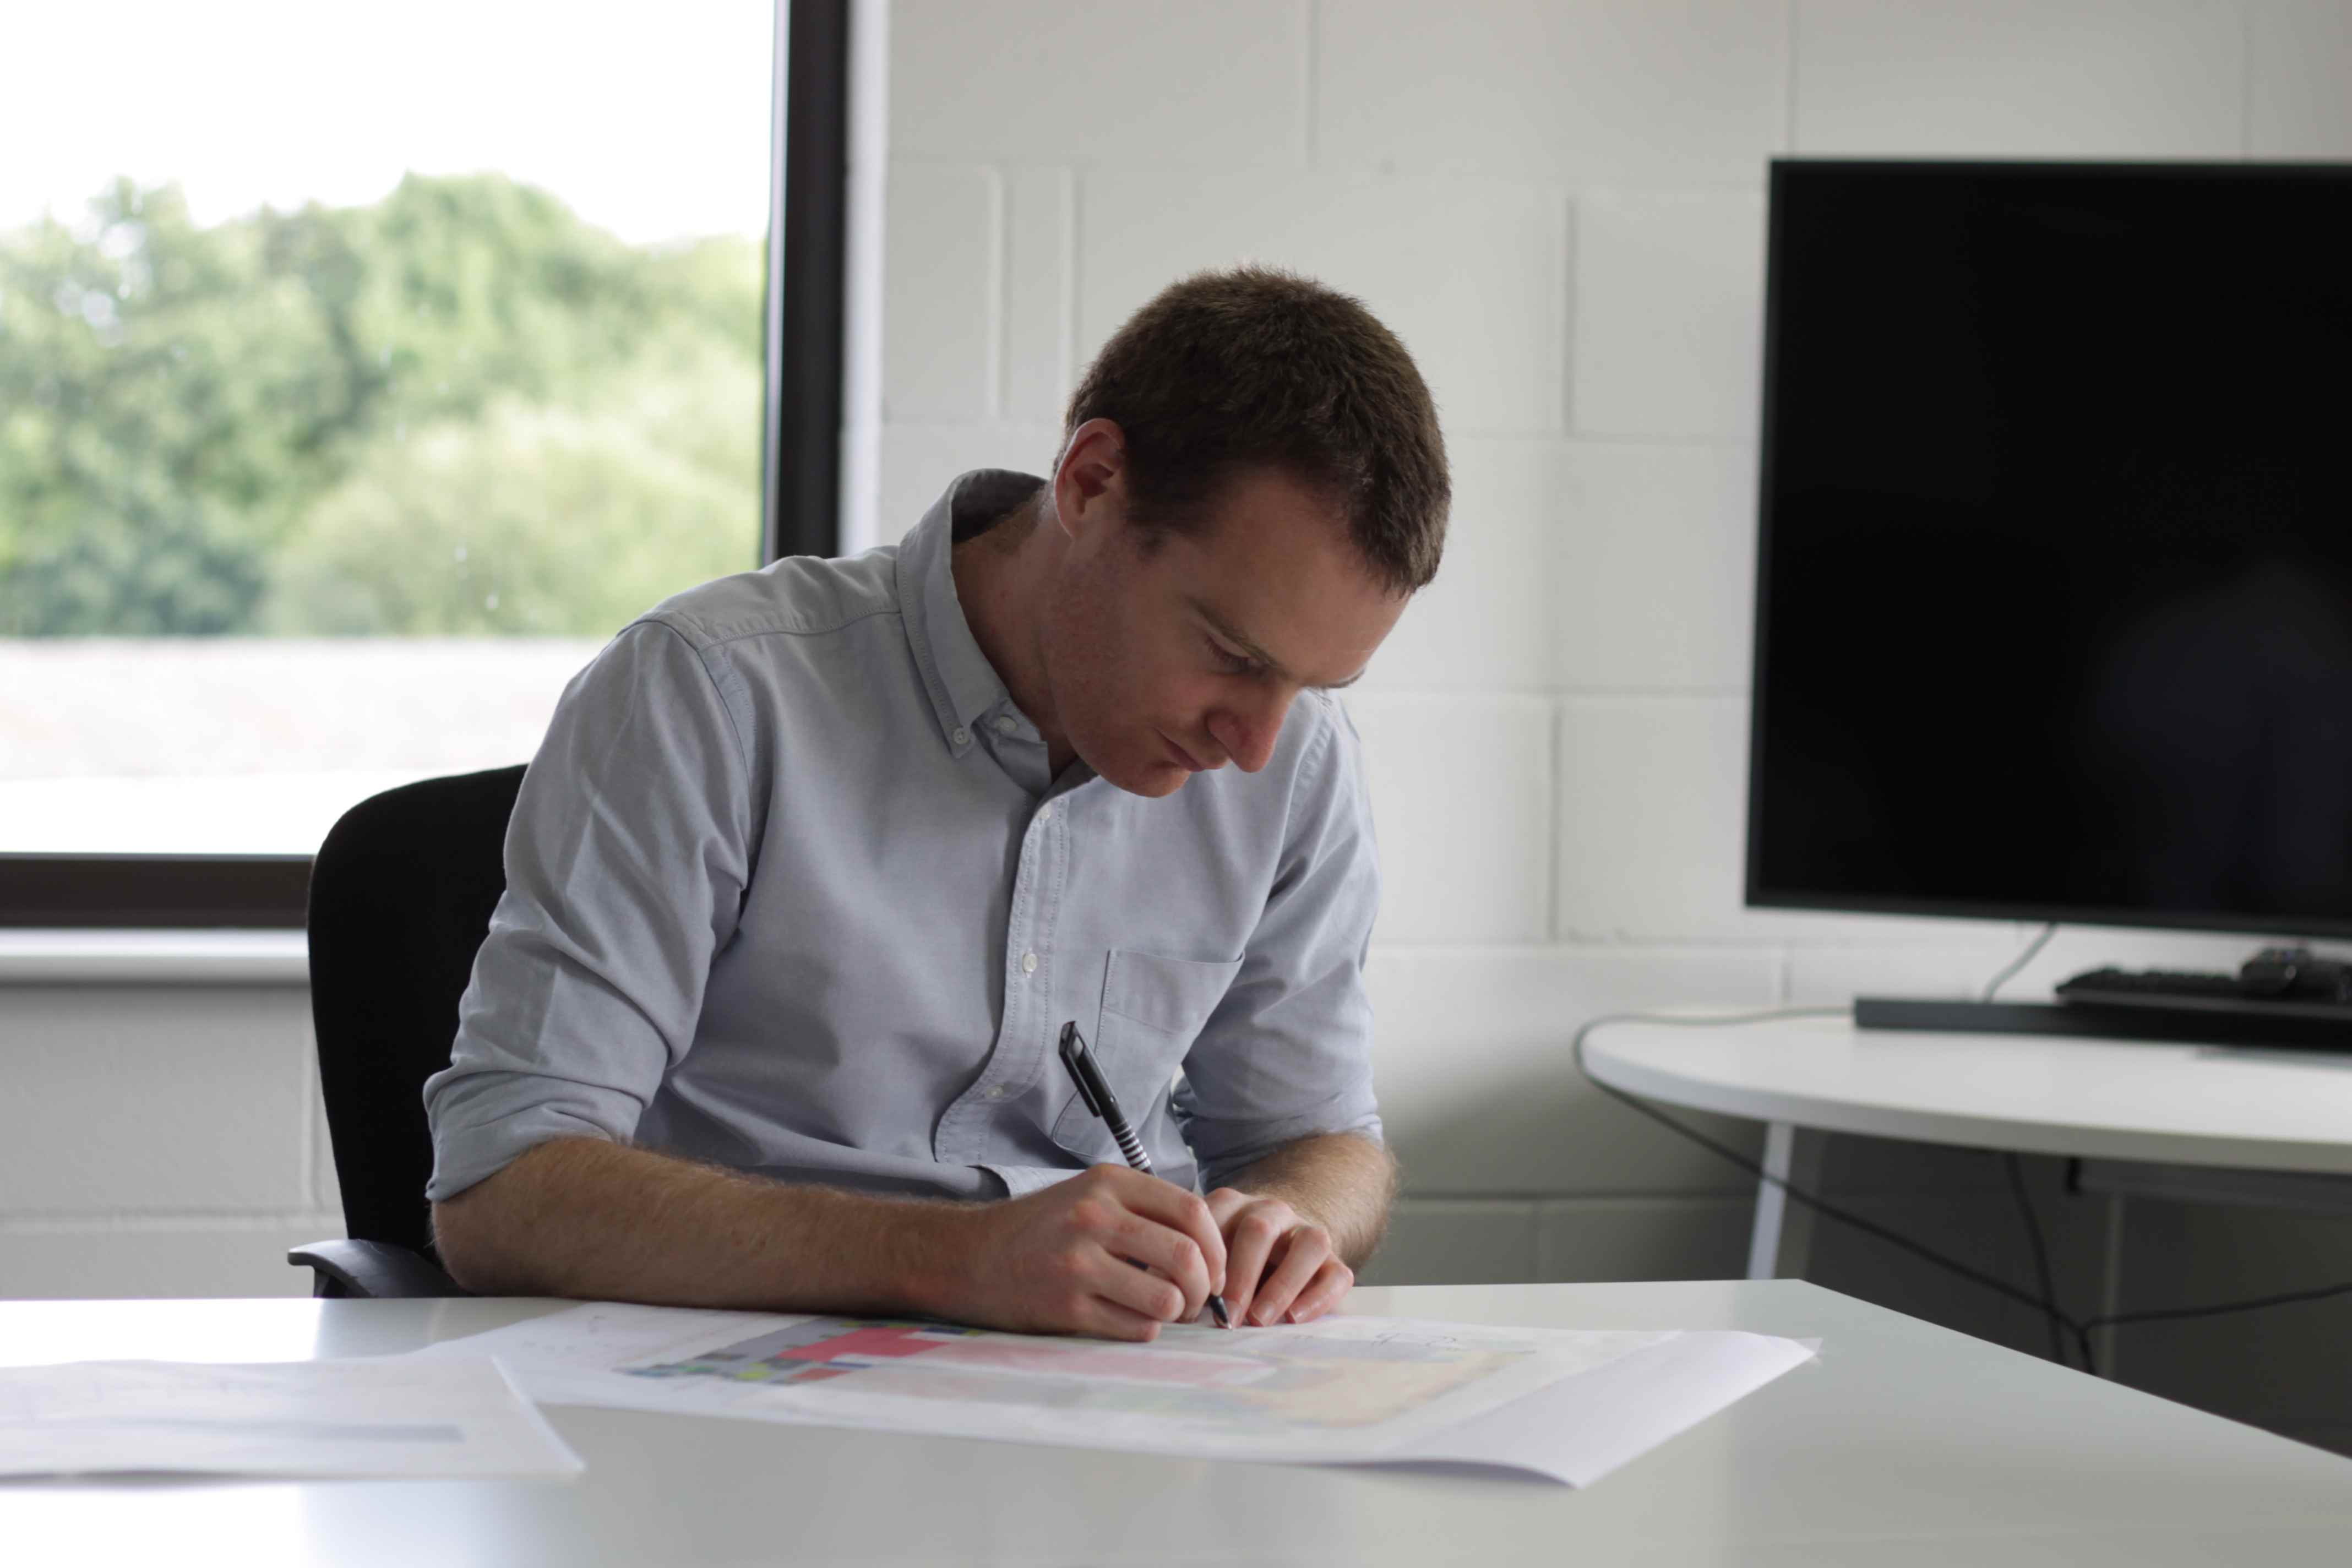 A photo of Joe Dimery, sketching over a layout drawing using tracing paper